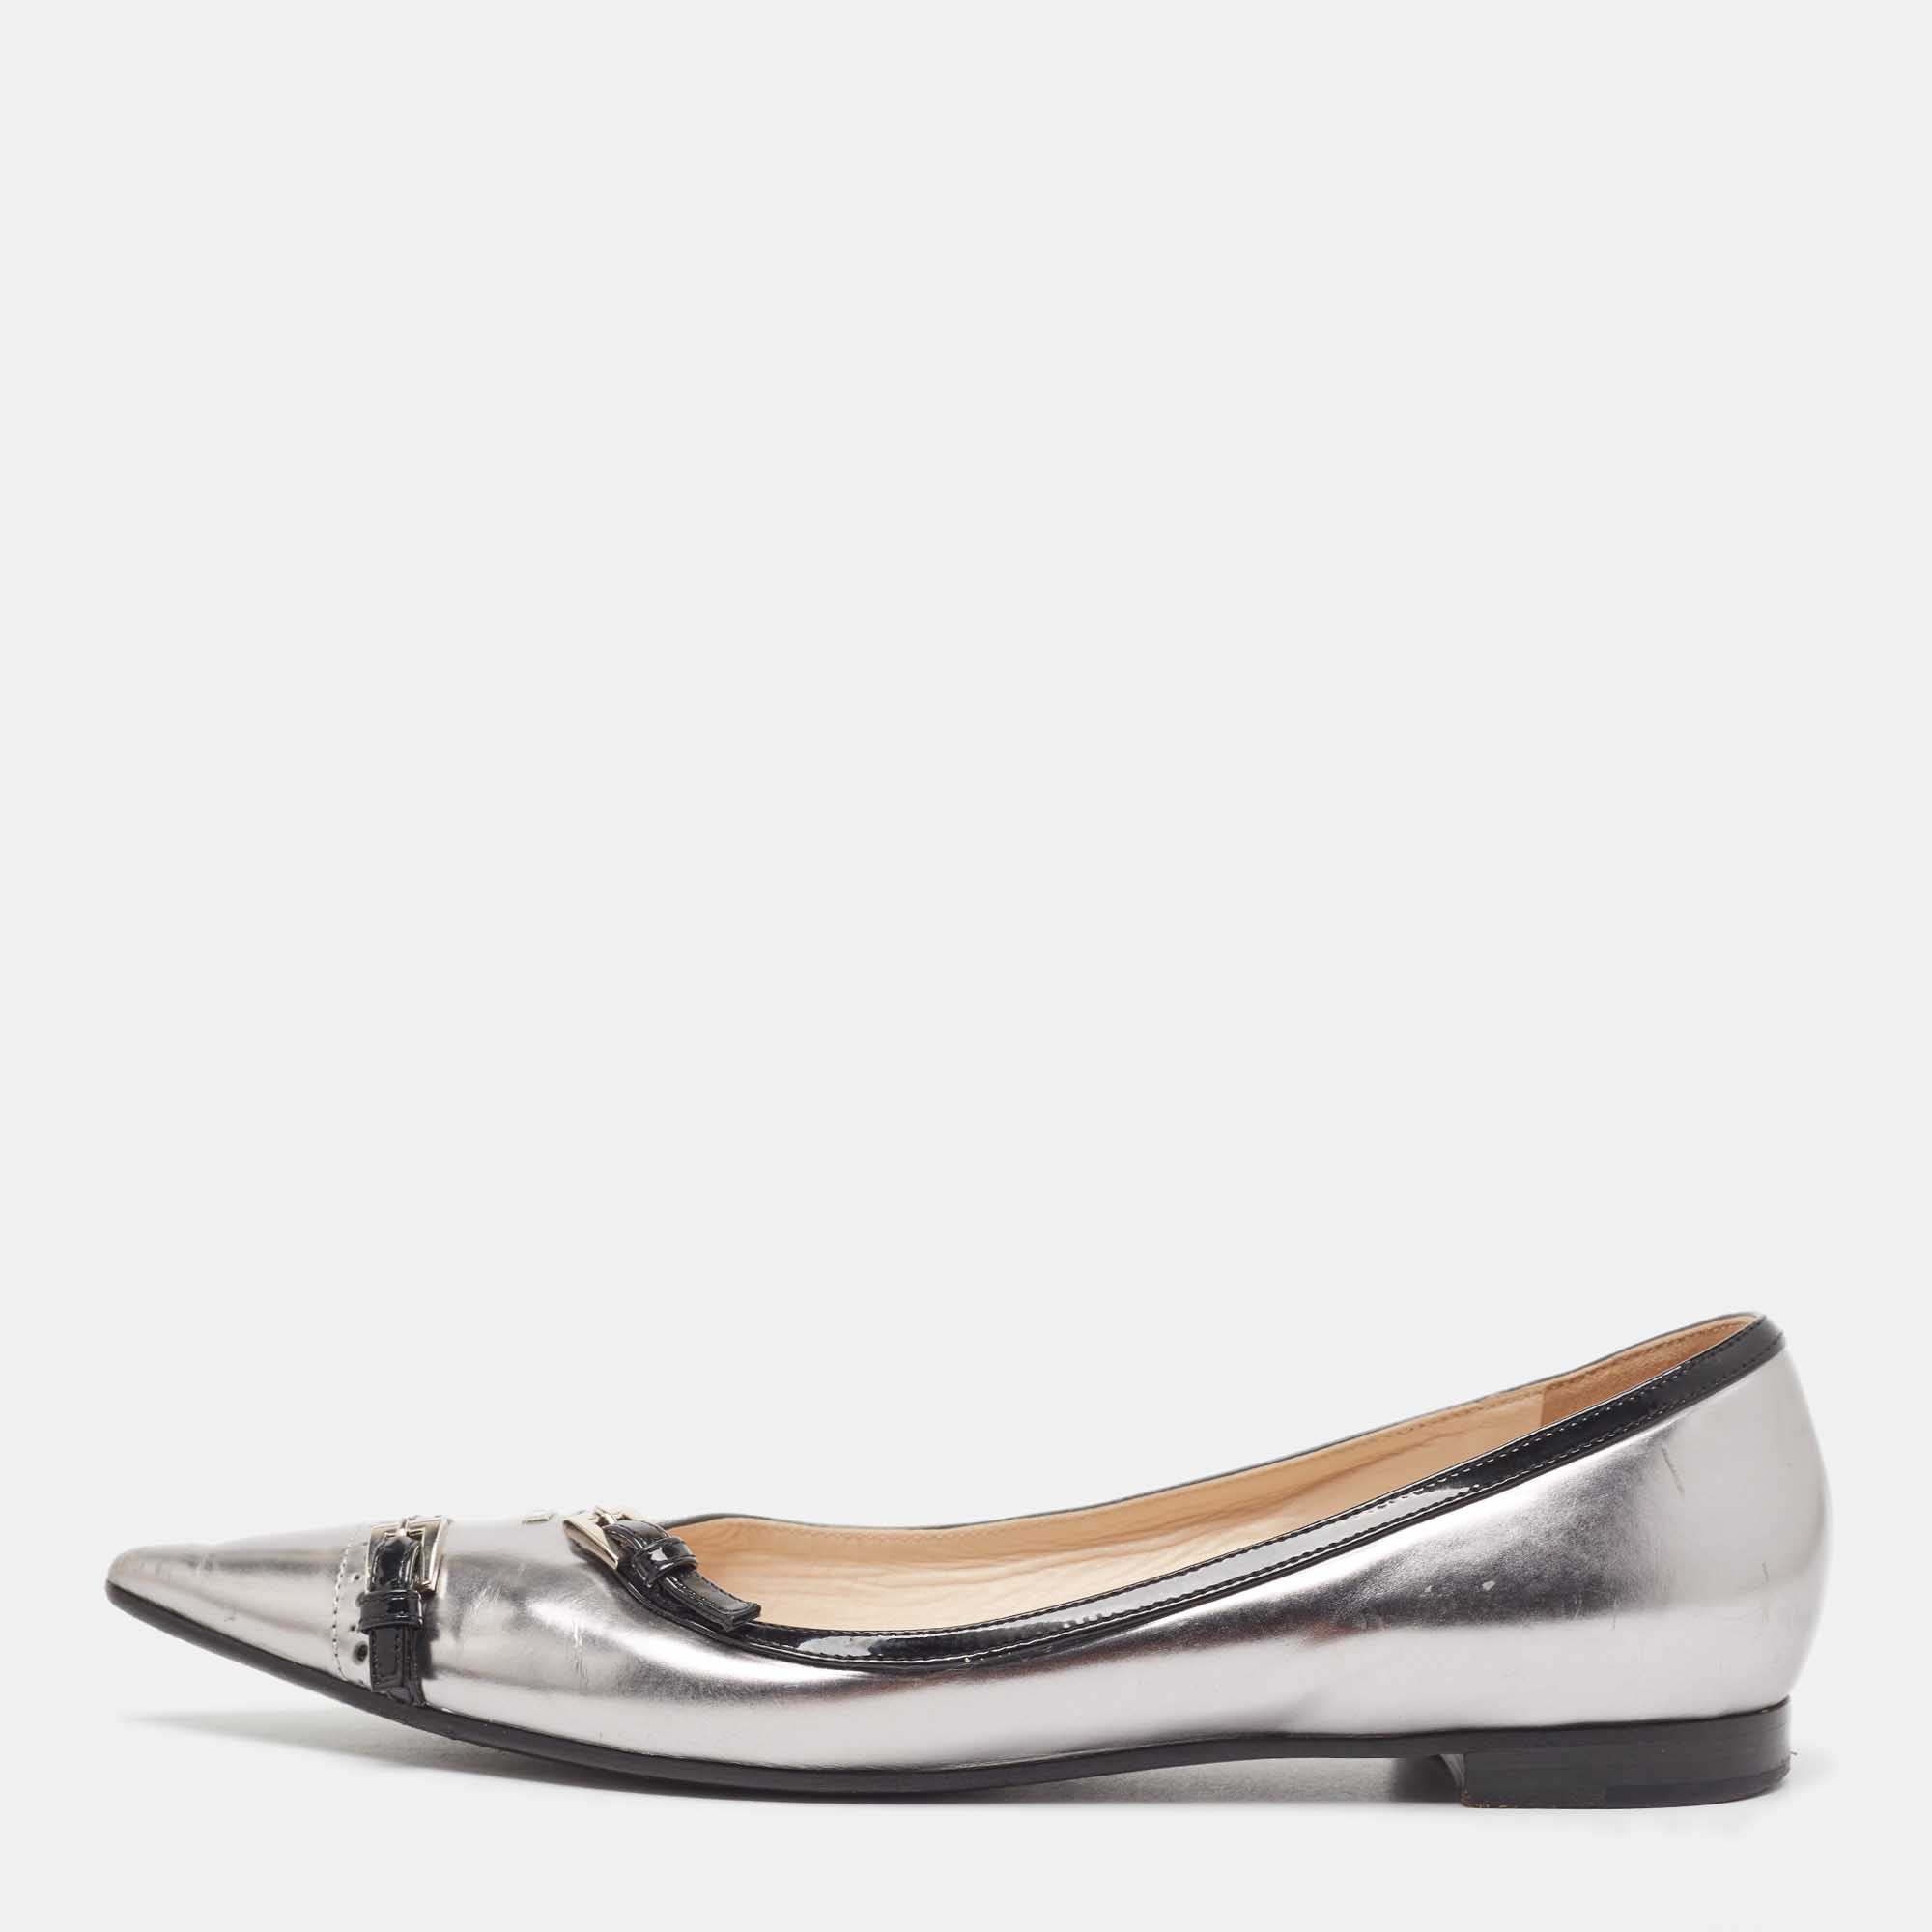 Prada silver/black patent and leather buckle detail pointed toe ballet flats size 38.5